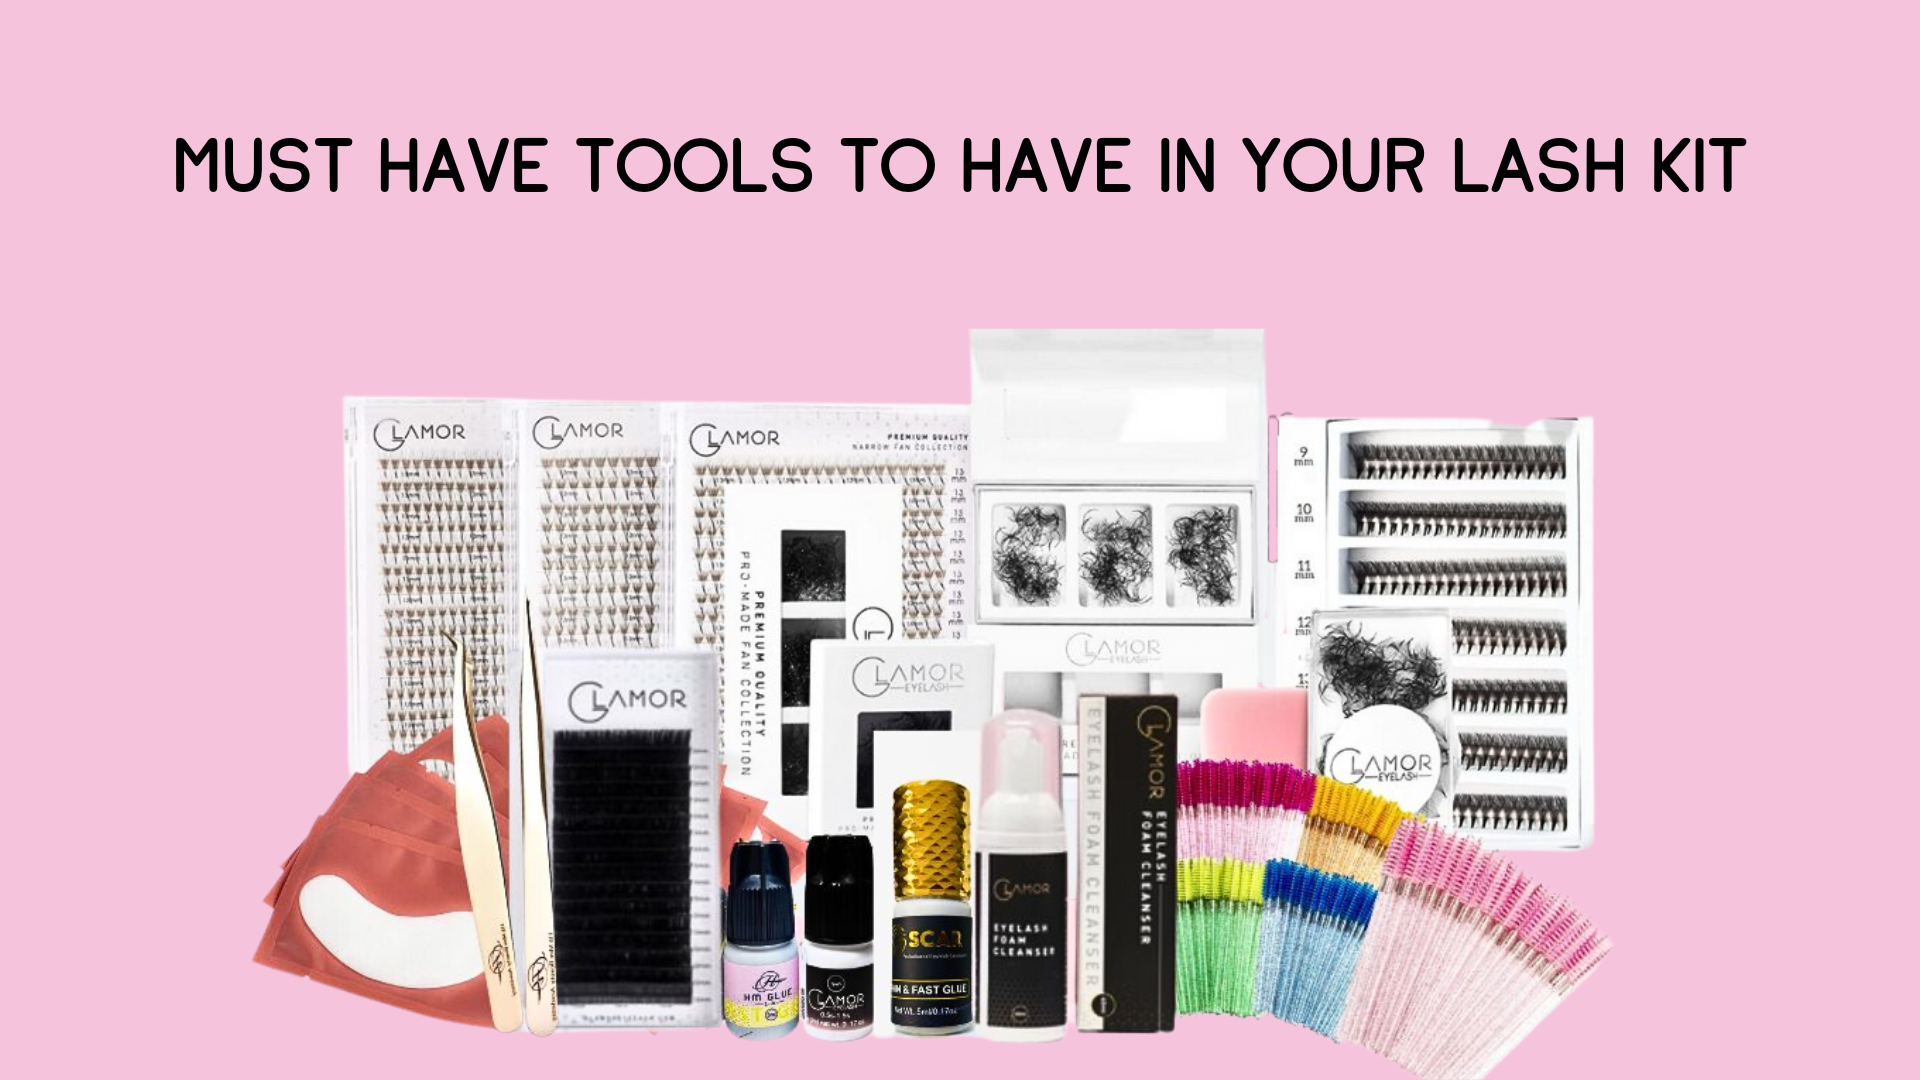 Must have tools to have in your lash kit